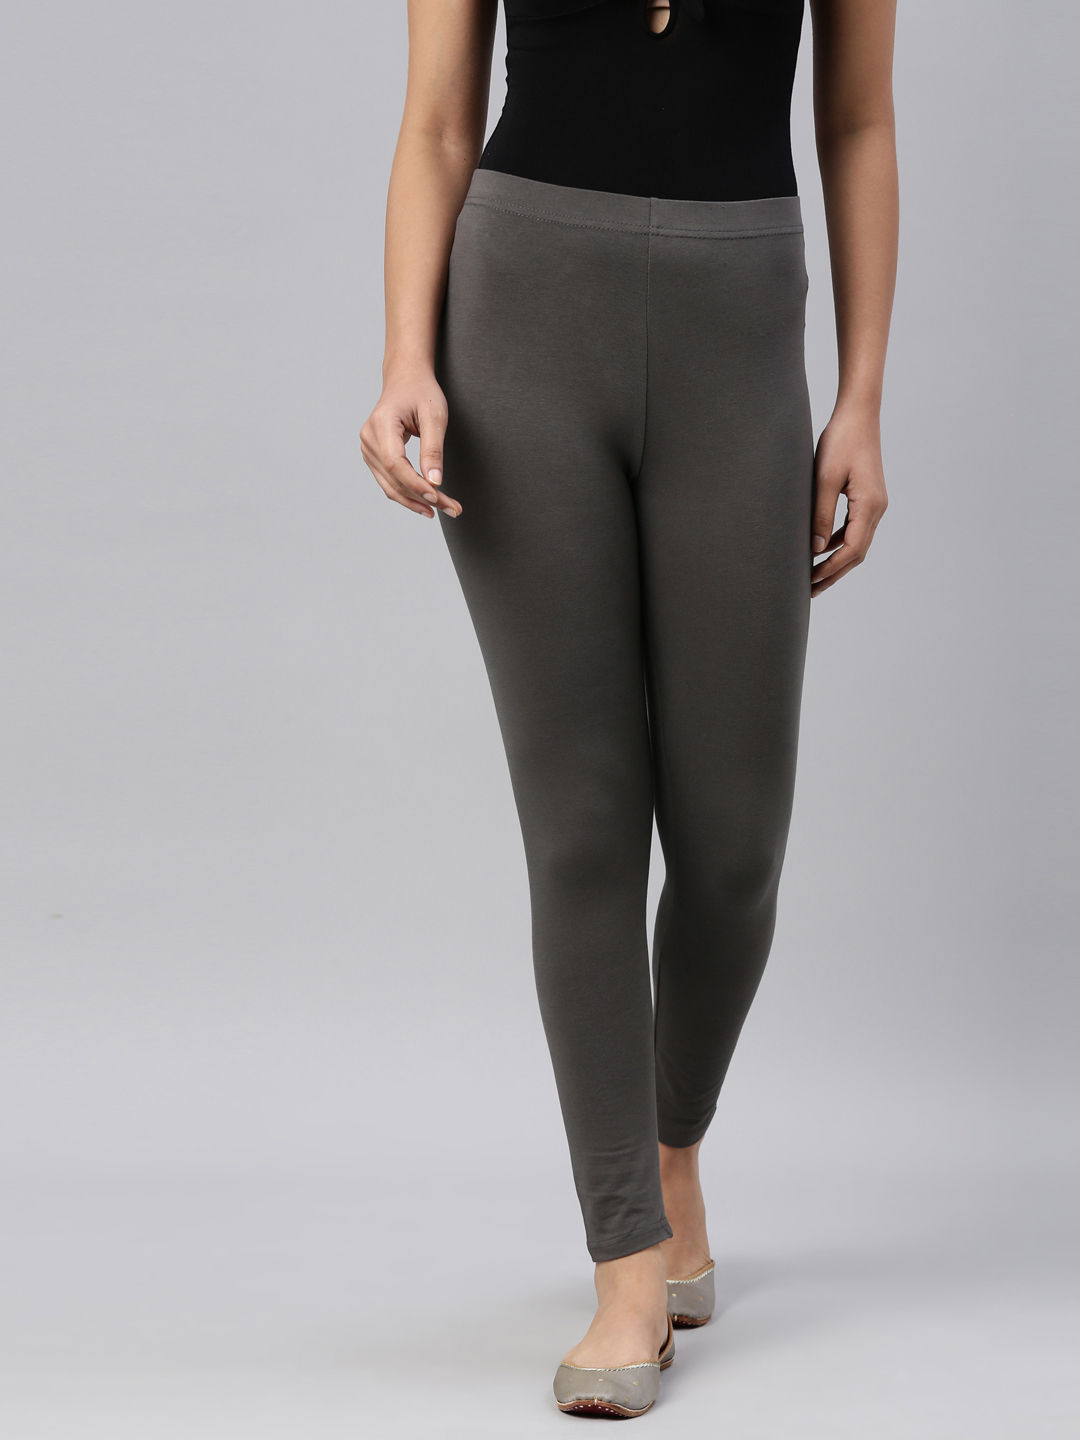 A Guide On Finding Your Perfect Legging Length | Alo Yoga